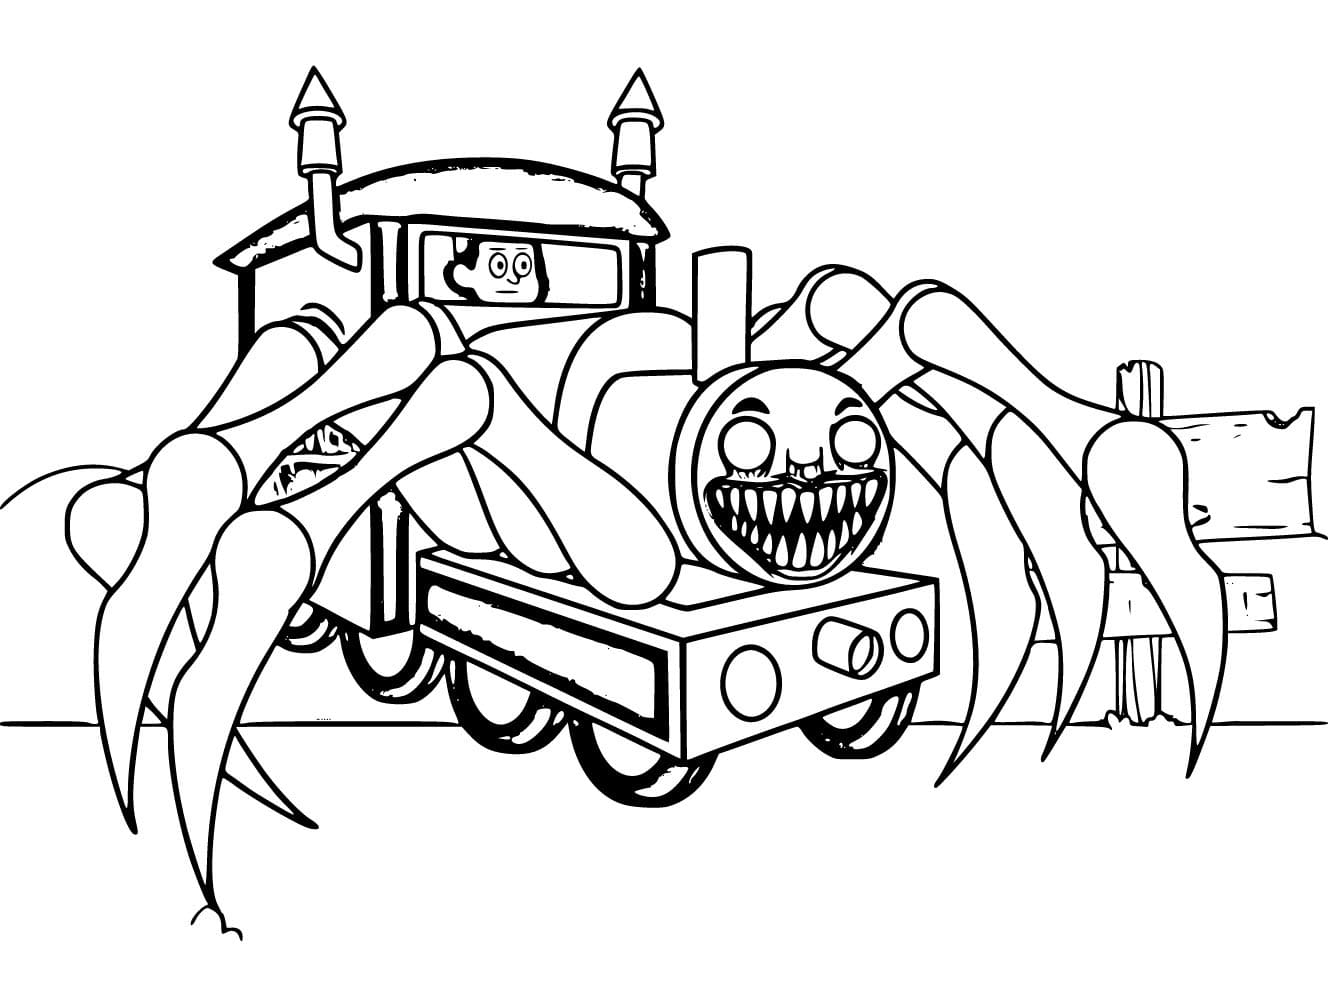 Choo Choo coloring Charles in 2023  Free coloring pages, Train drawing,  Coloring pages